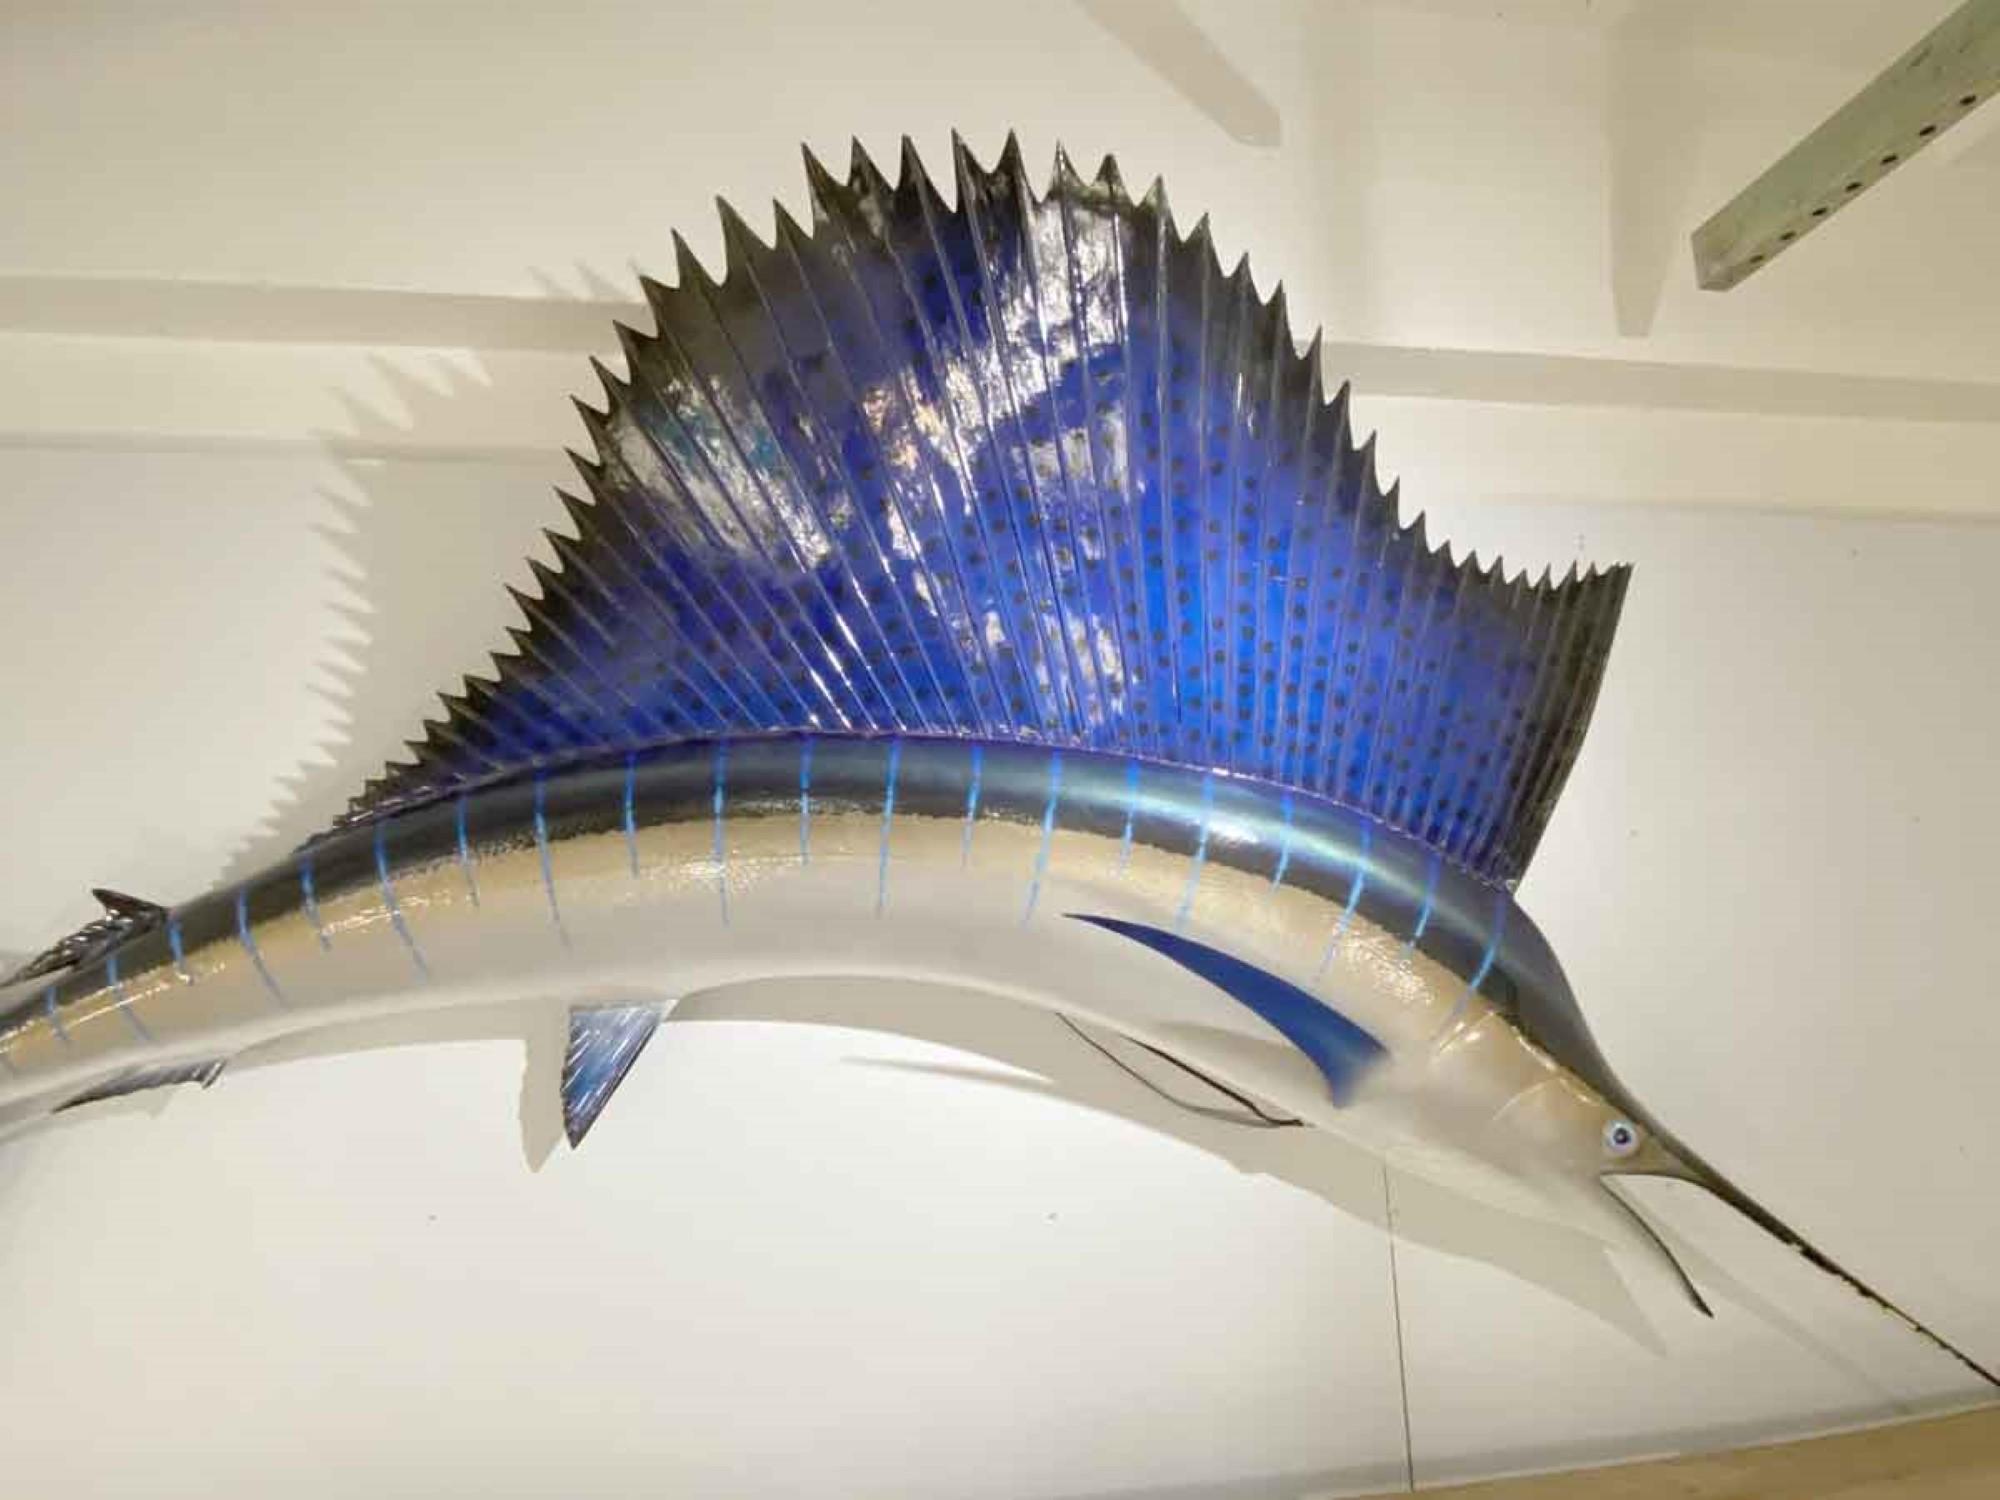 1990s life-size blue and gray sailfish replica made of fiberglass. Please note, this item is located in one of our NYC locations.